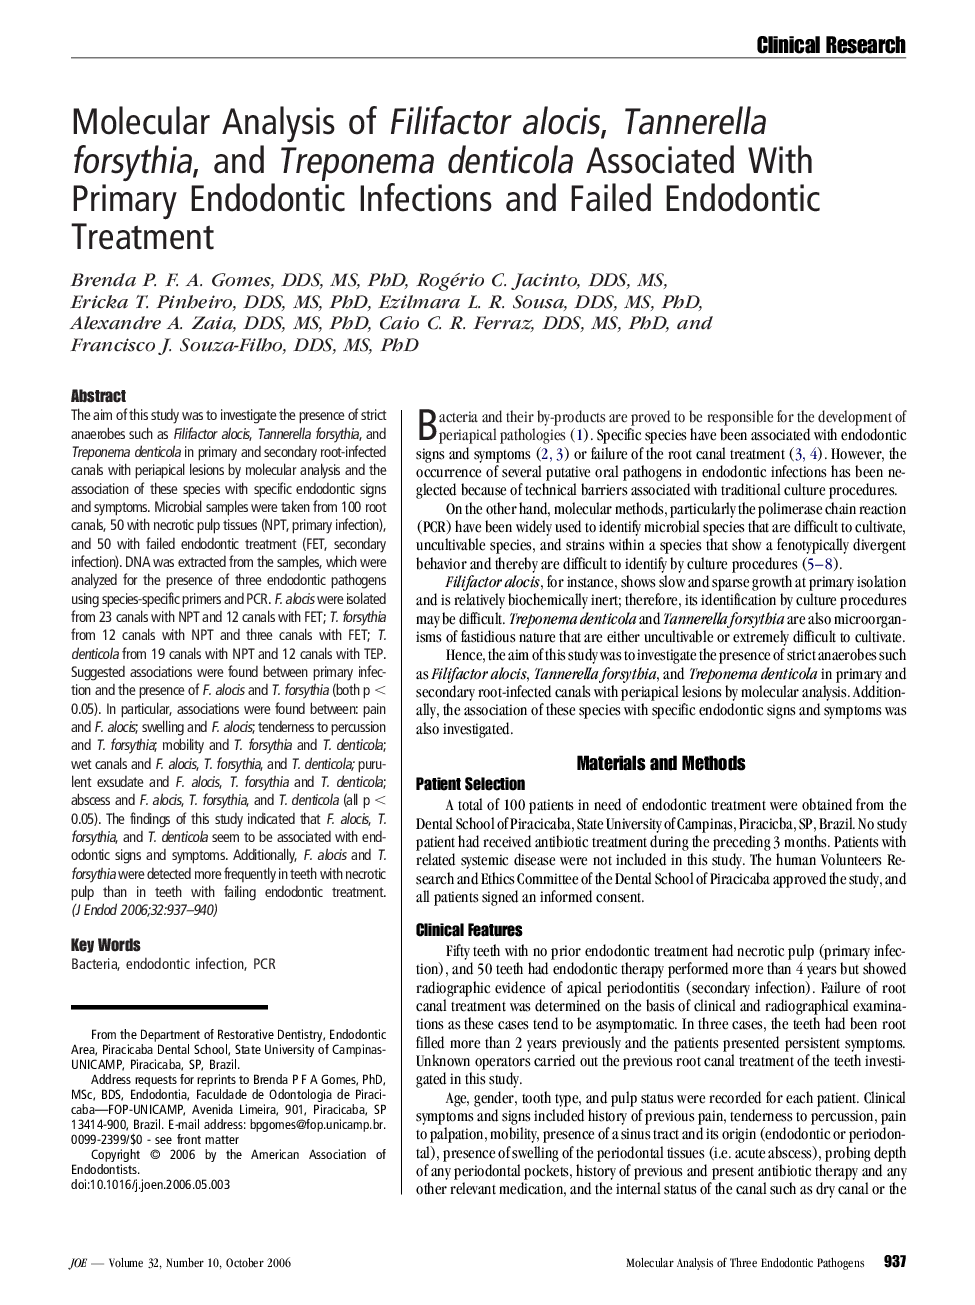 Molecular Analysis of Filifactor alocis, Tannerella forsythia, and Treponema denticola Associated With Primary Endodontic Infections and Failed Endodontic Treatment